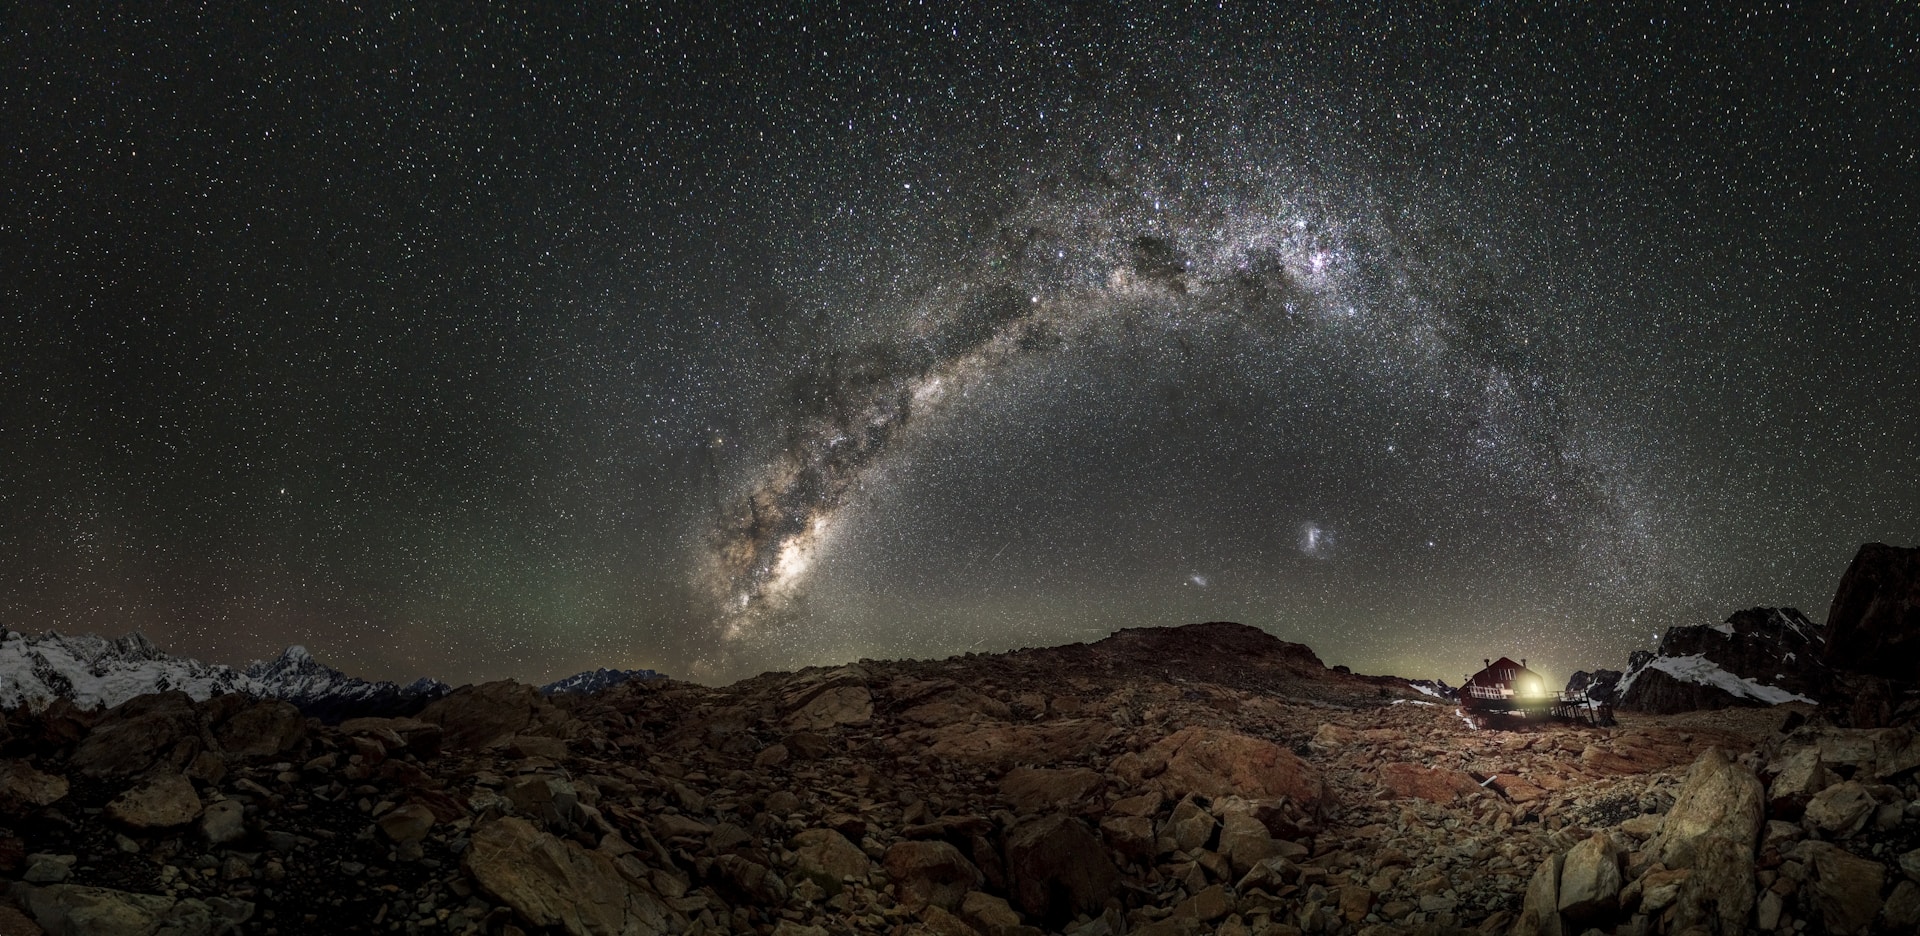 Milky Way photographed over Mount Cook in New Zealand - a best place to see the Milky Way 